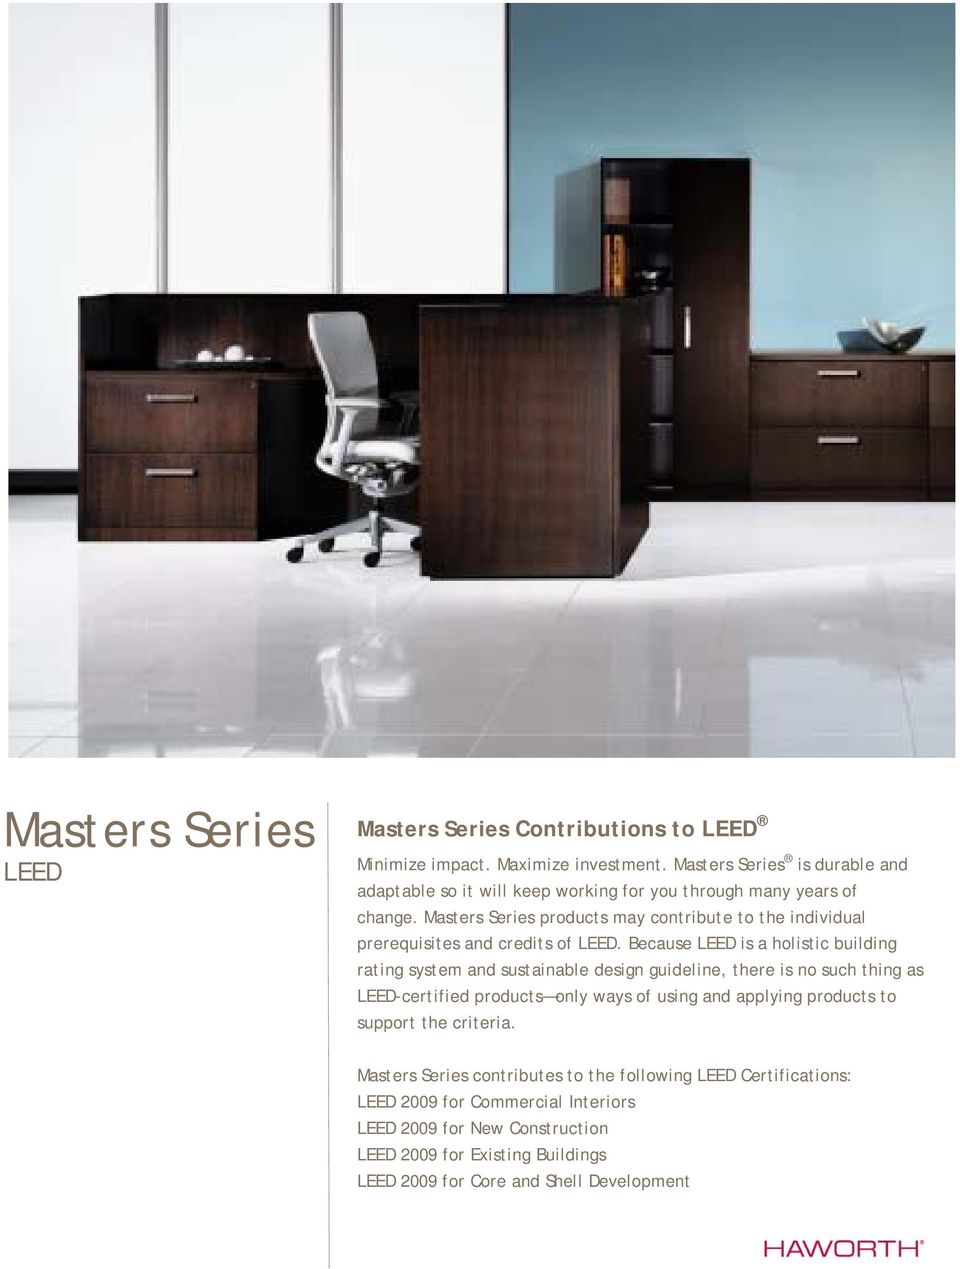 Masters Series products may contribute to the individual prerequisites and credits of LEED.